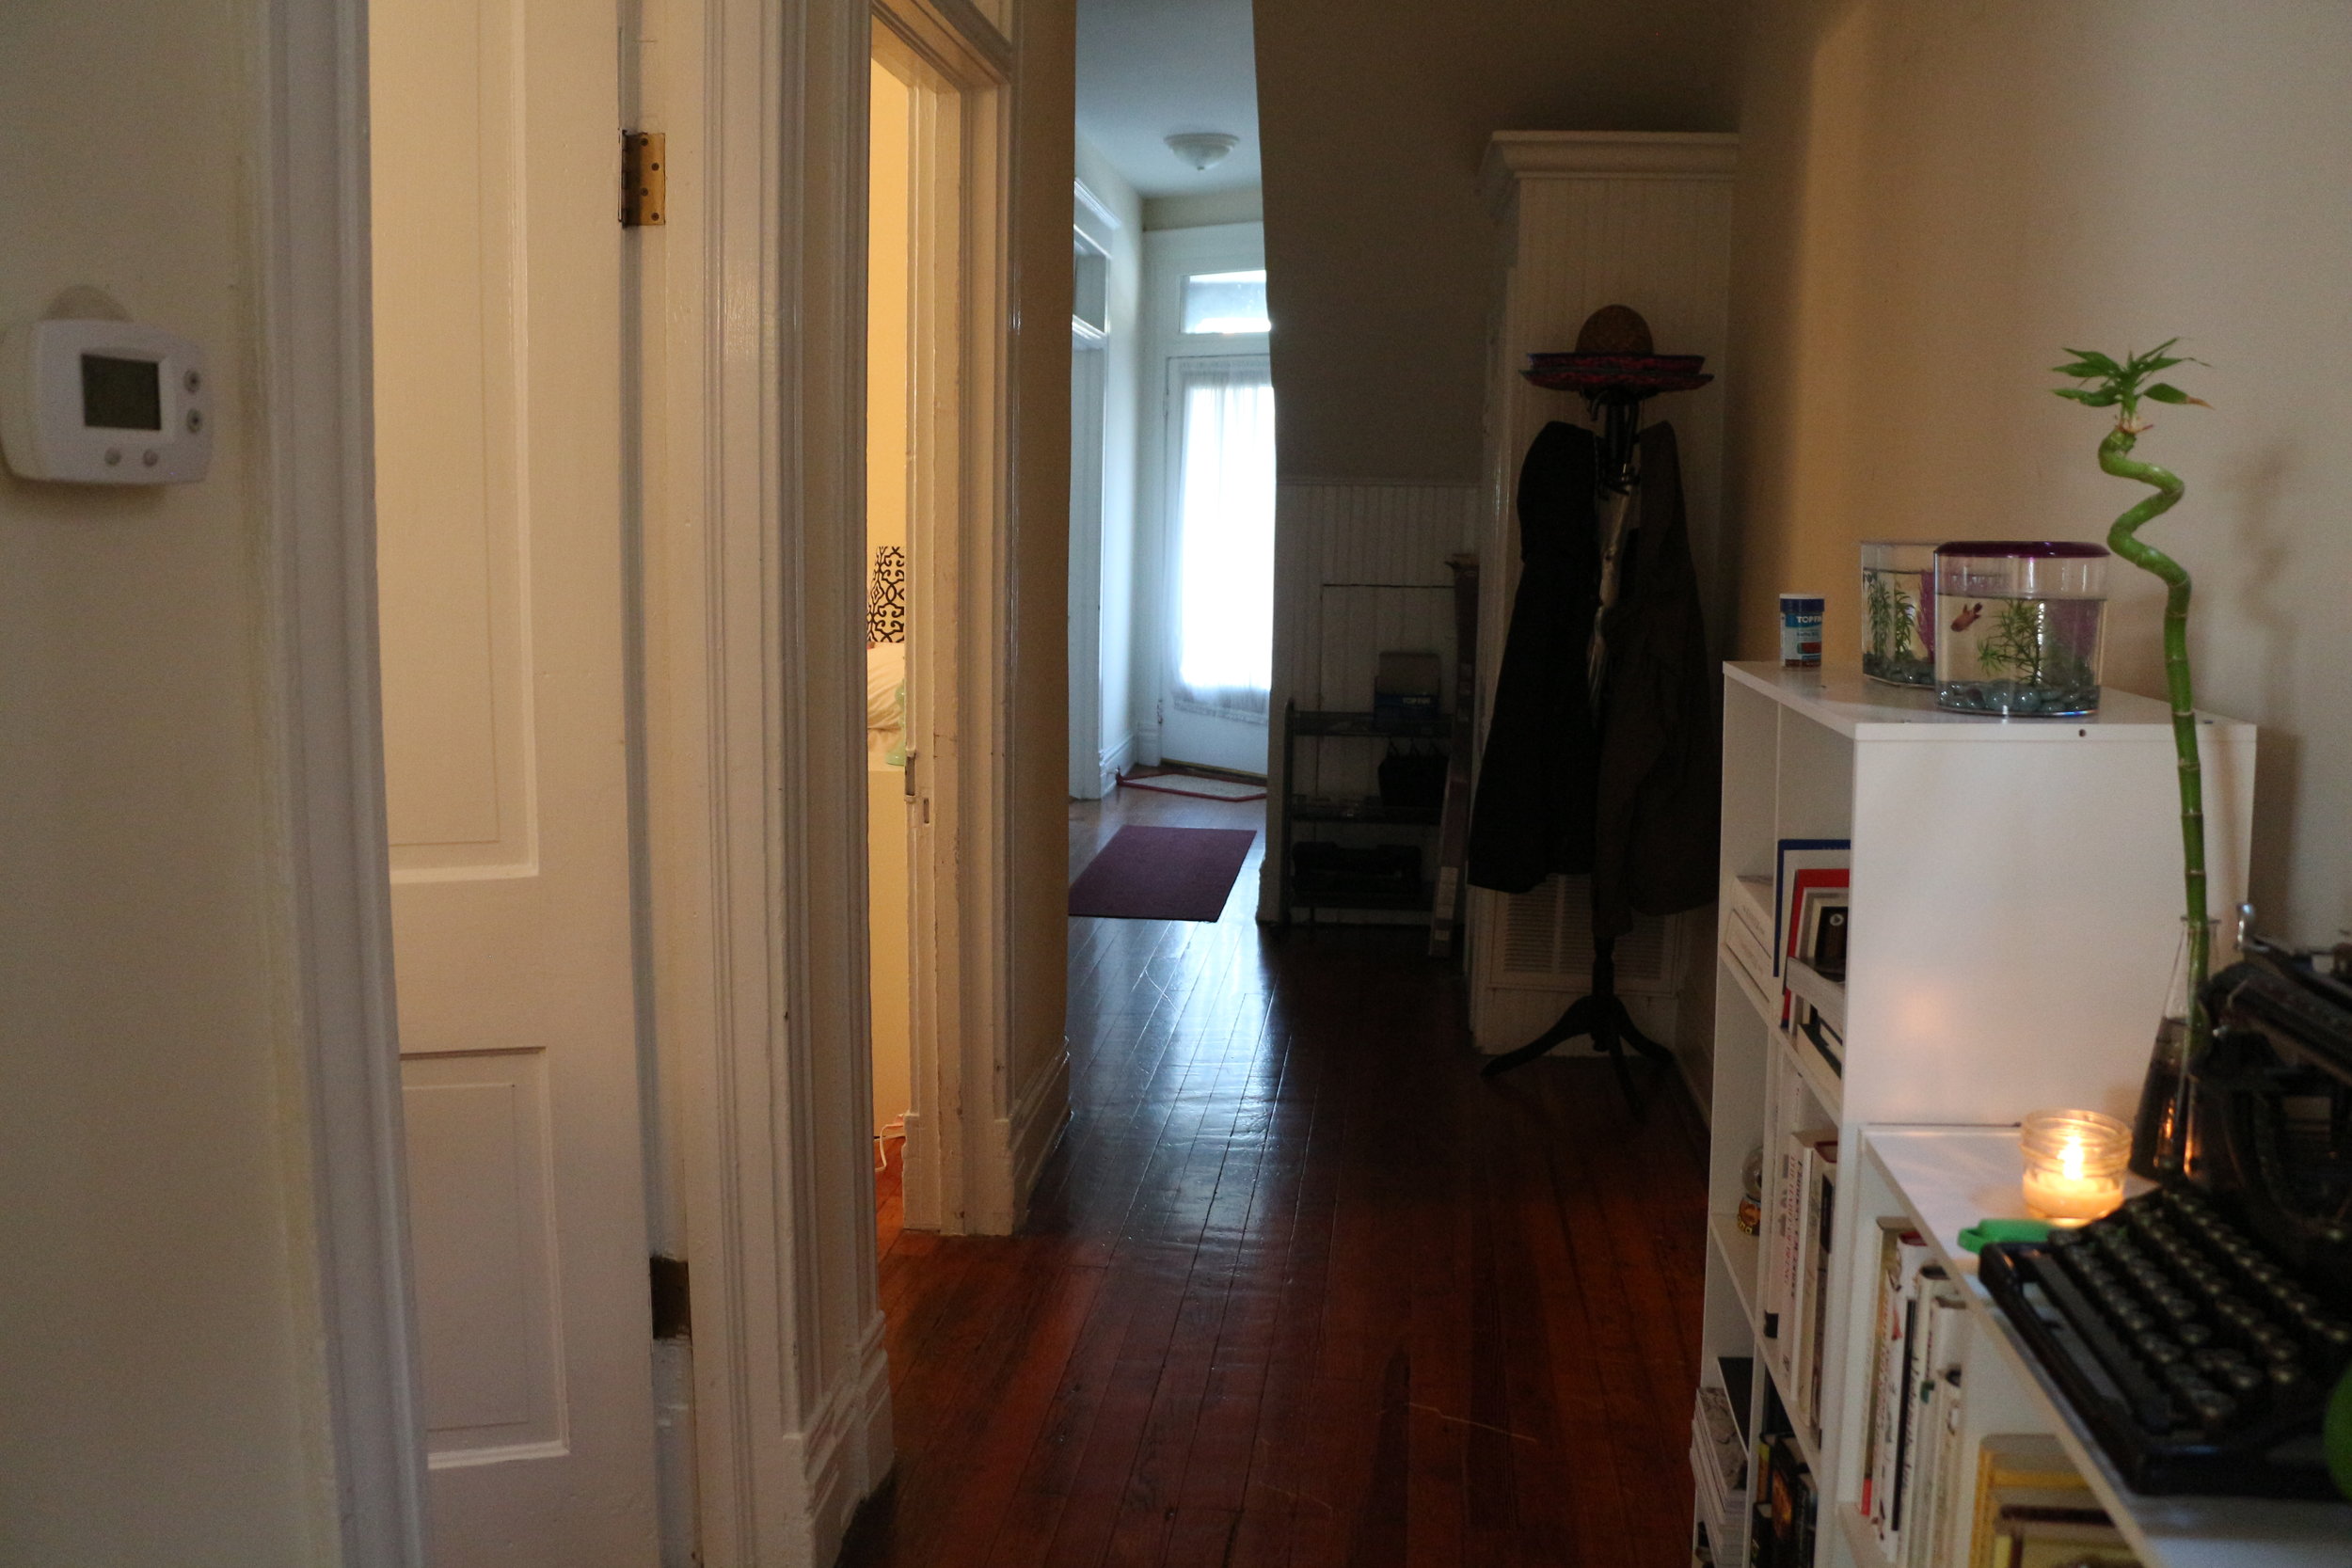 From the kitchen/bathroom end of the hallway down to the front door (my room is the first door on the left)